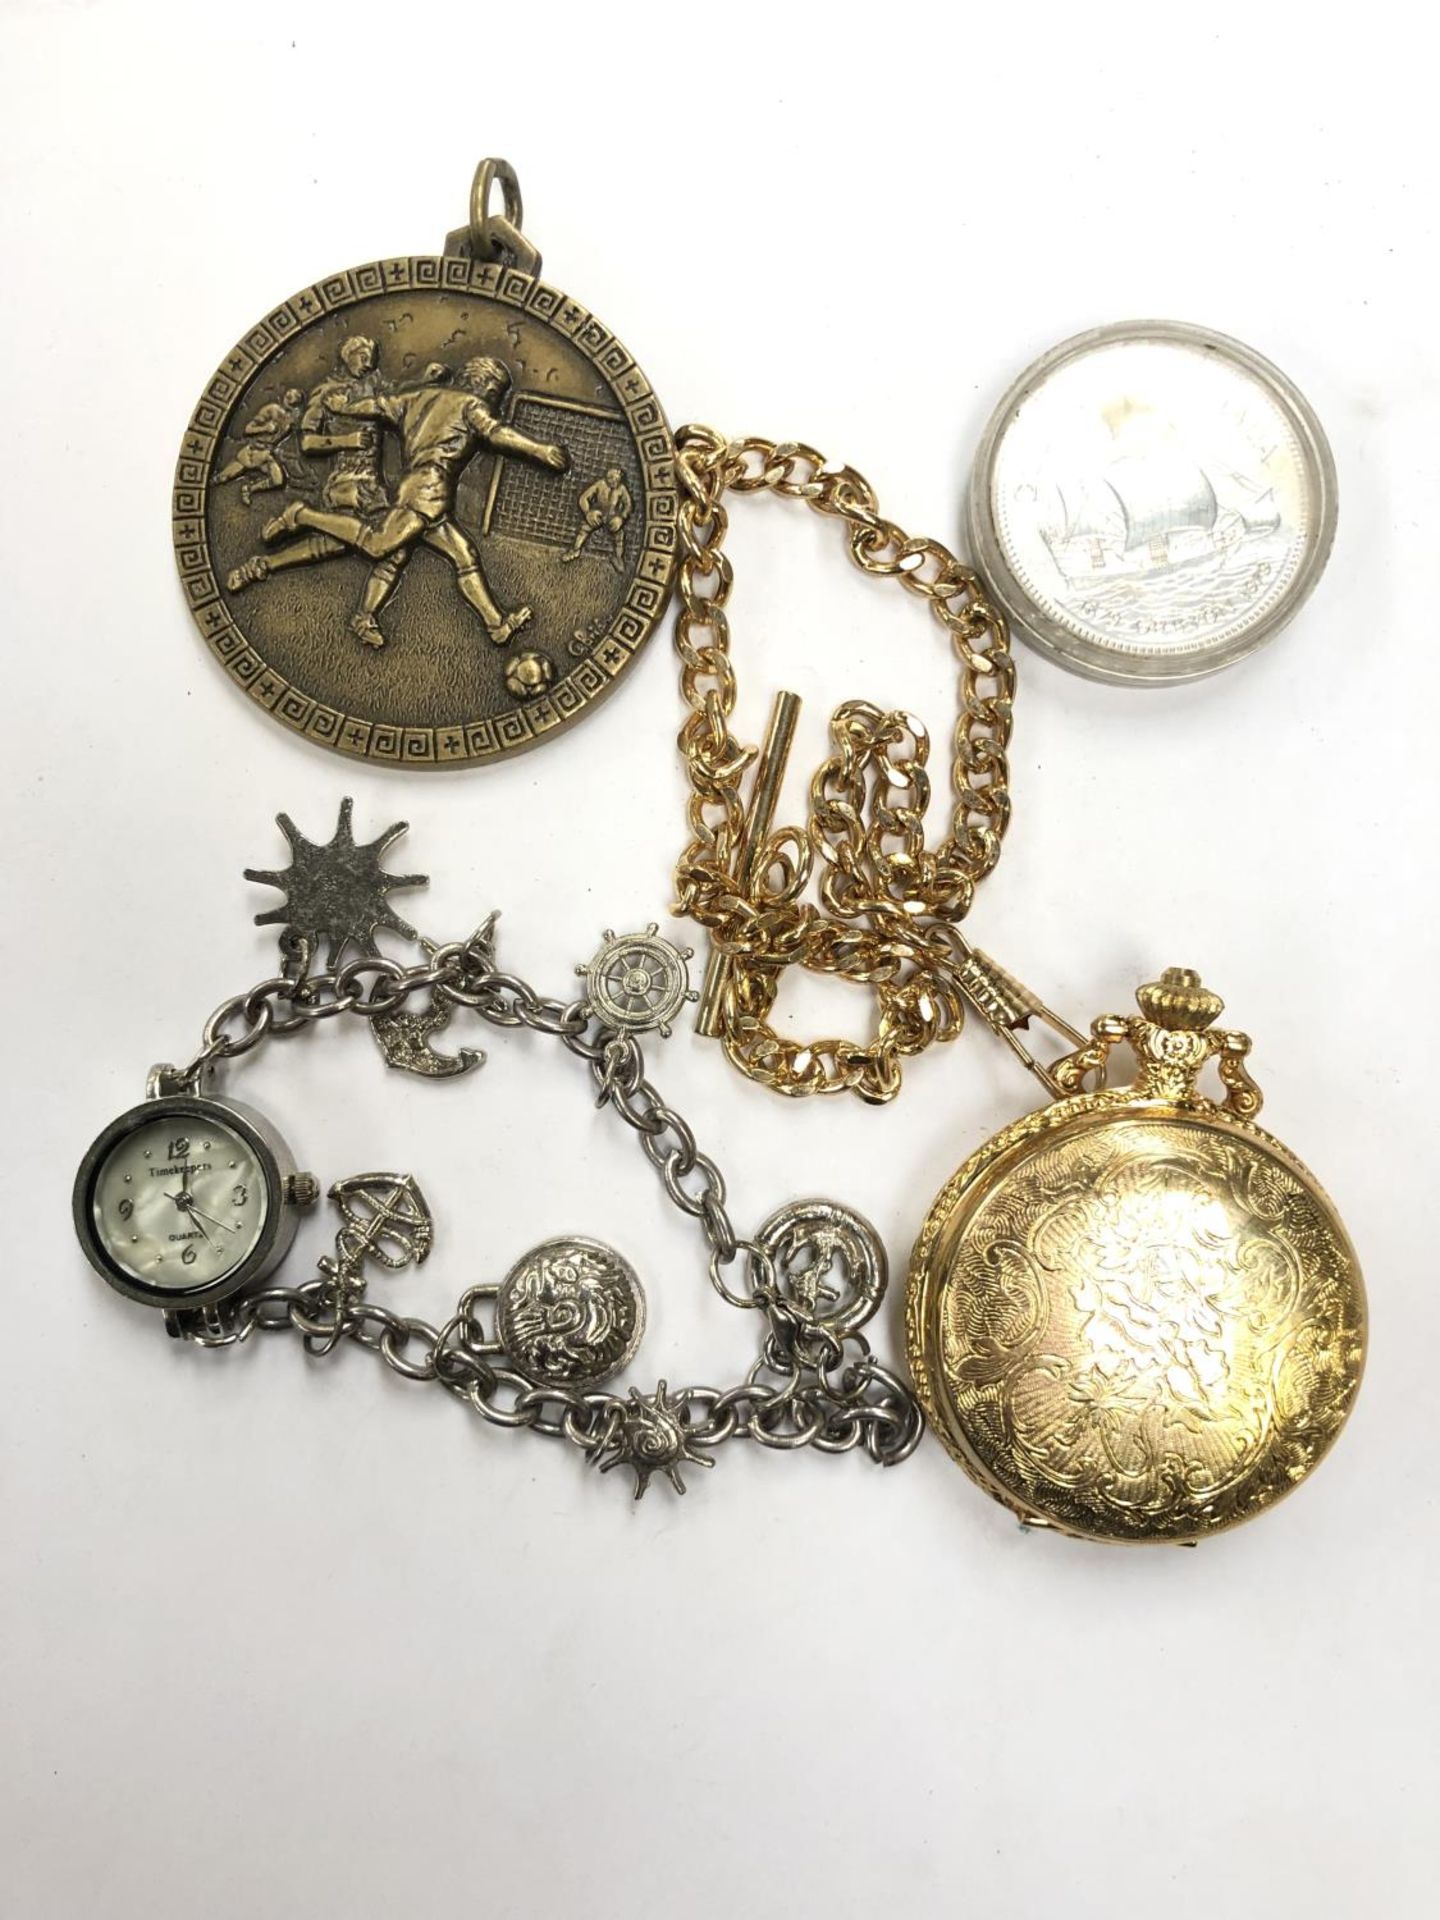 A MODERN QUARTZ POCKET WATCH AND CHAIN, BRACELET, MEDAL AND CANADIAN DOLLAR COIN (4)